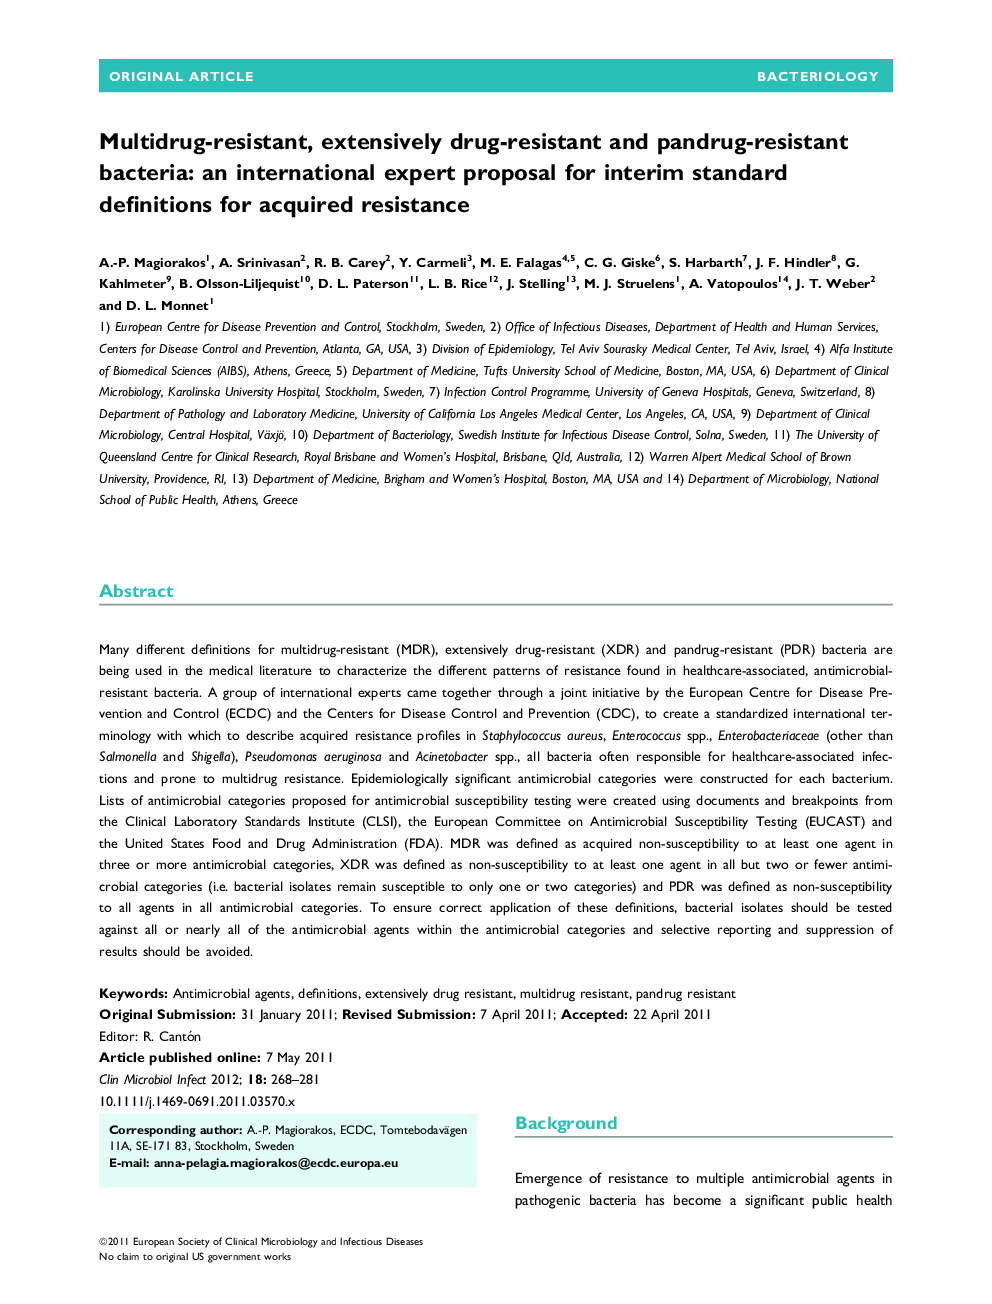 Multidrug-resistant, extensively drug-resistant and pandrug-resistant bacteria: an international expert proposal for interim standard definitions for acquired resistance 